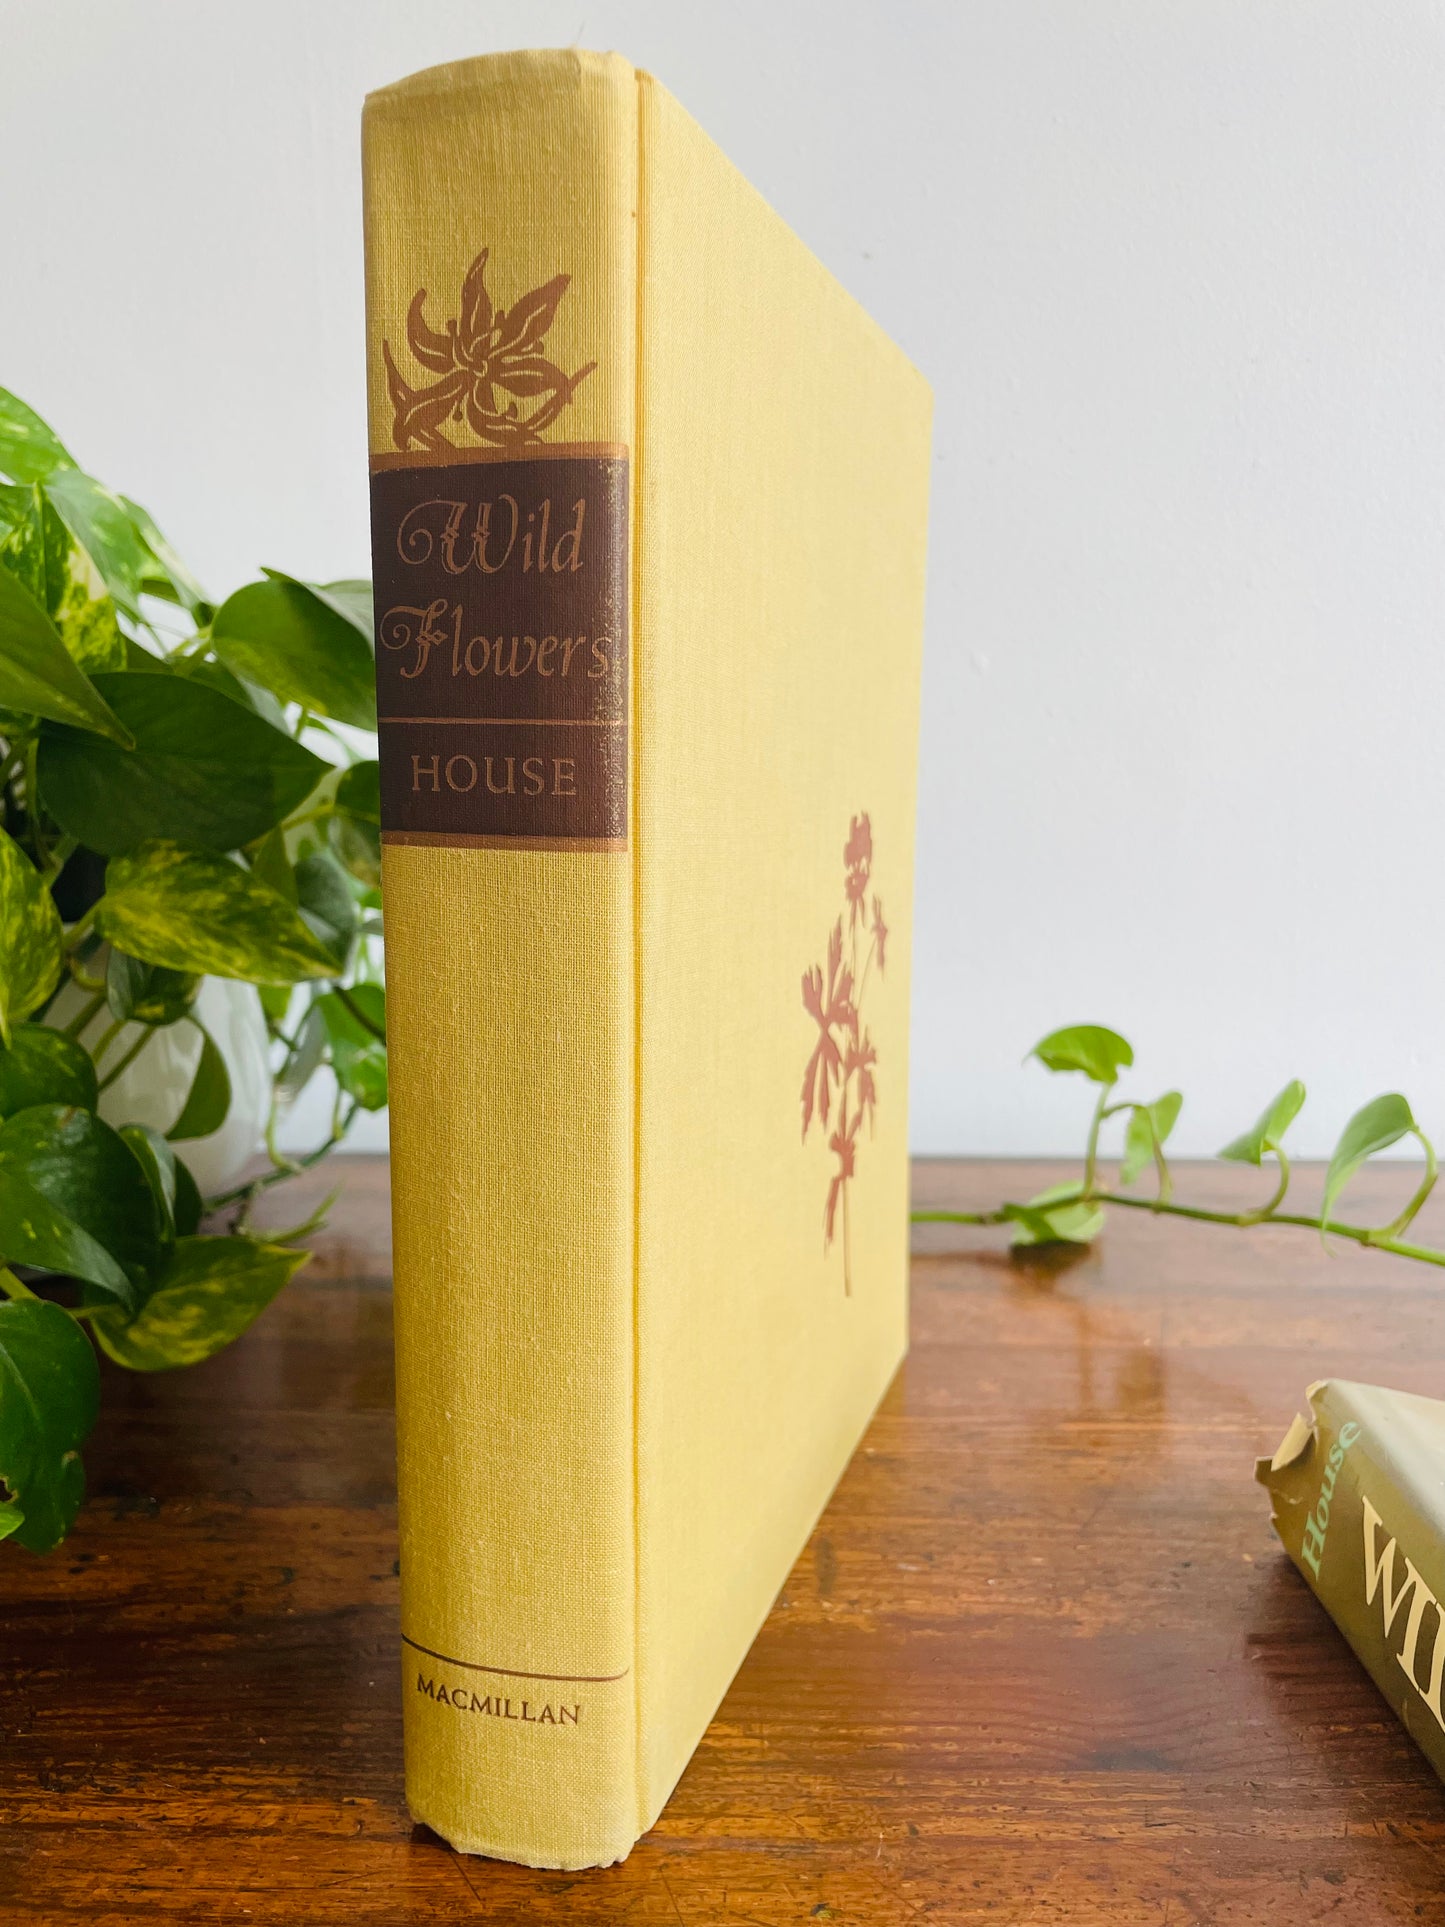 Wild Flowers Hardcover Book by Homer D. House (1974)